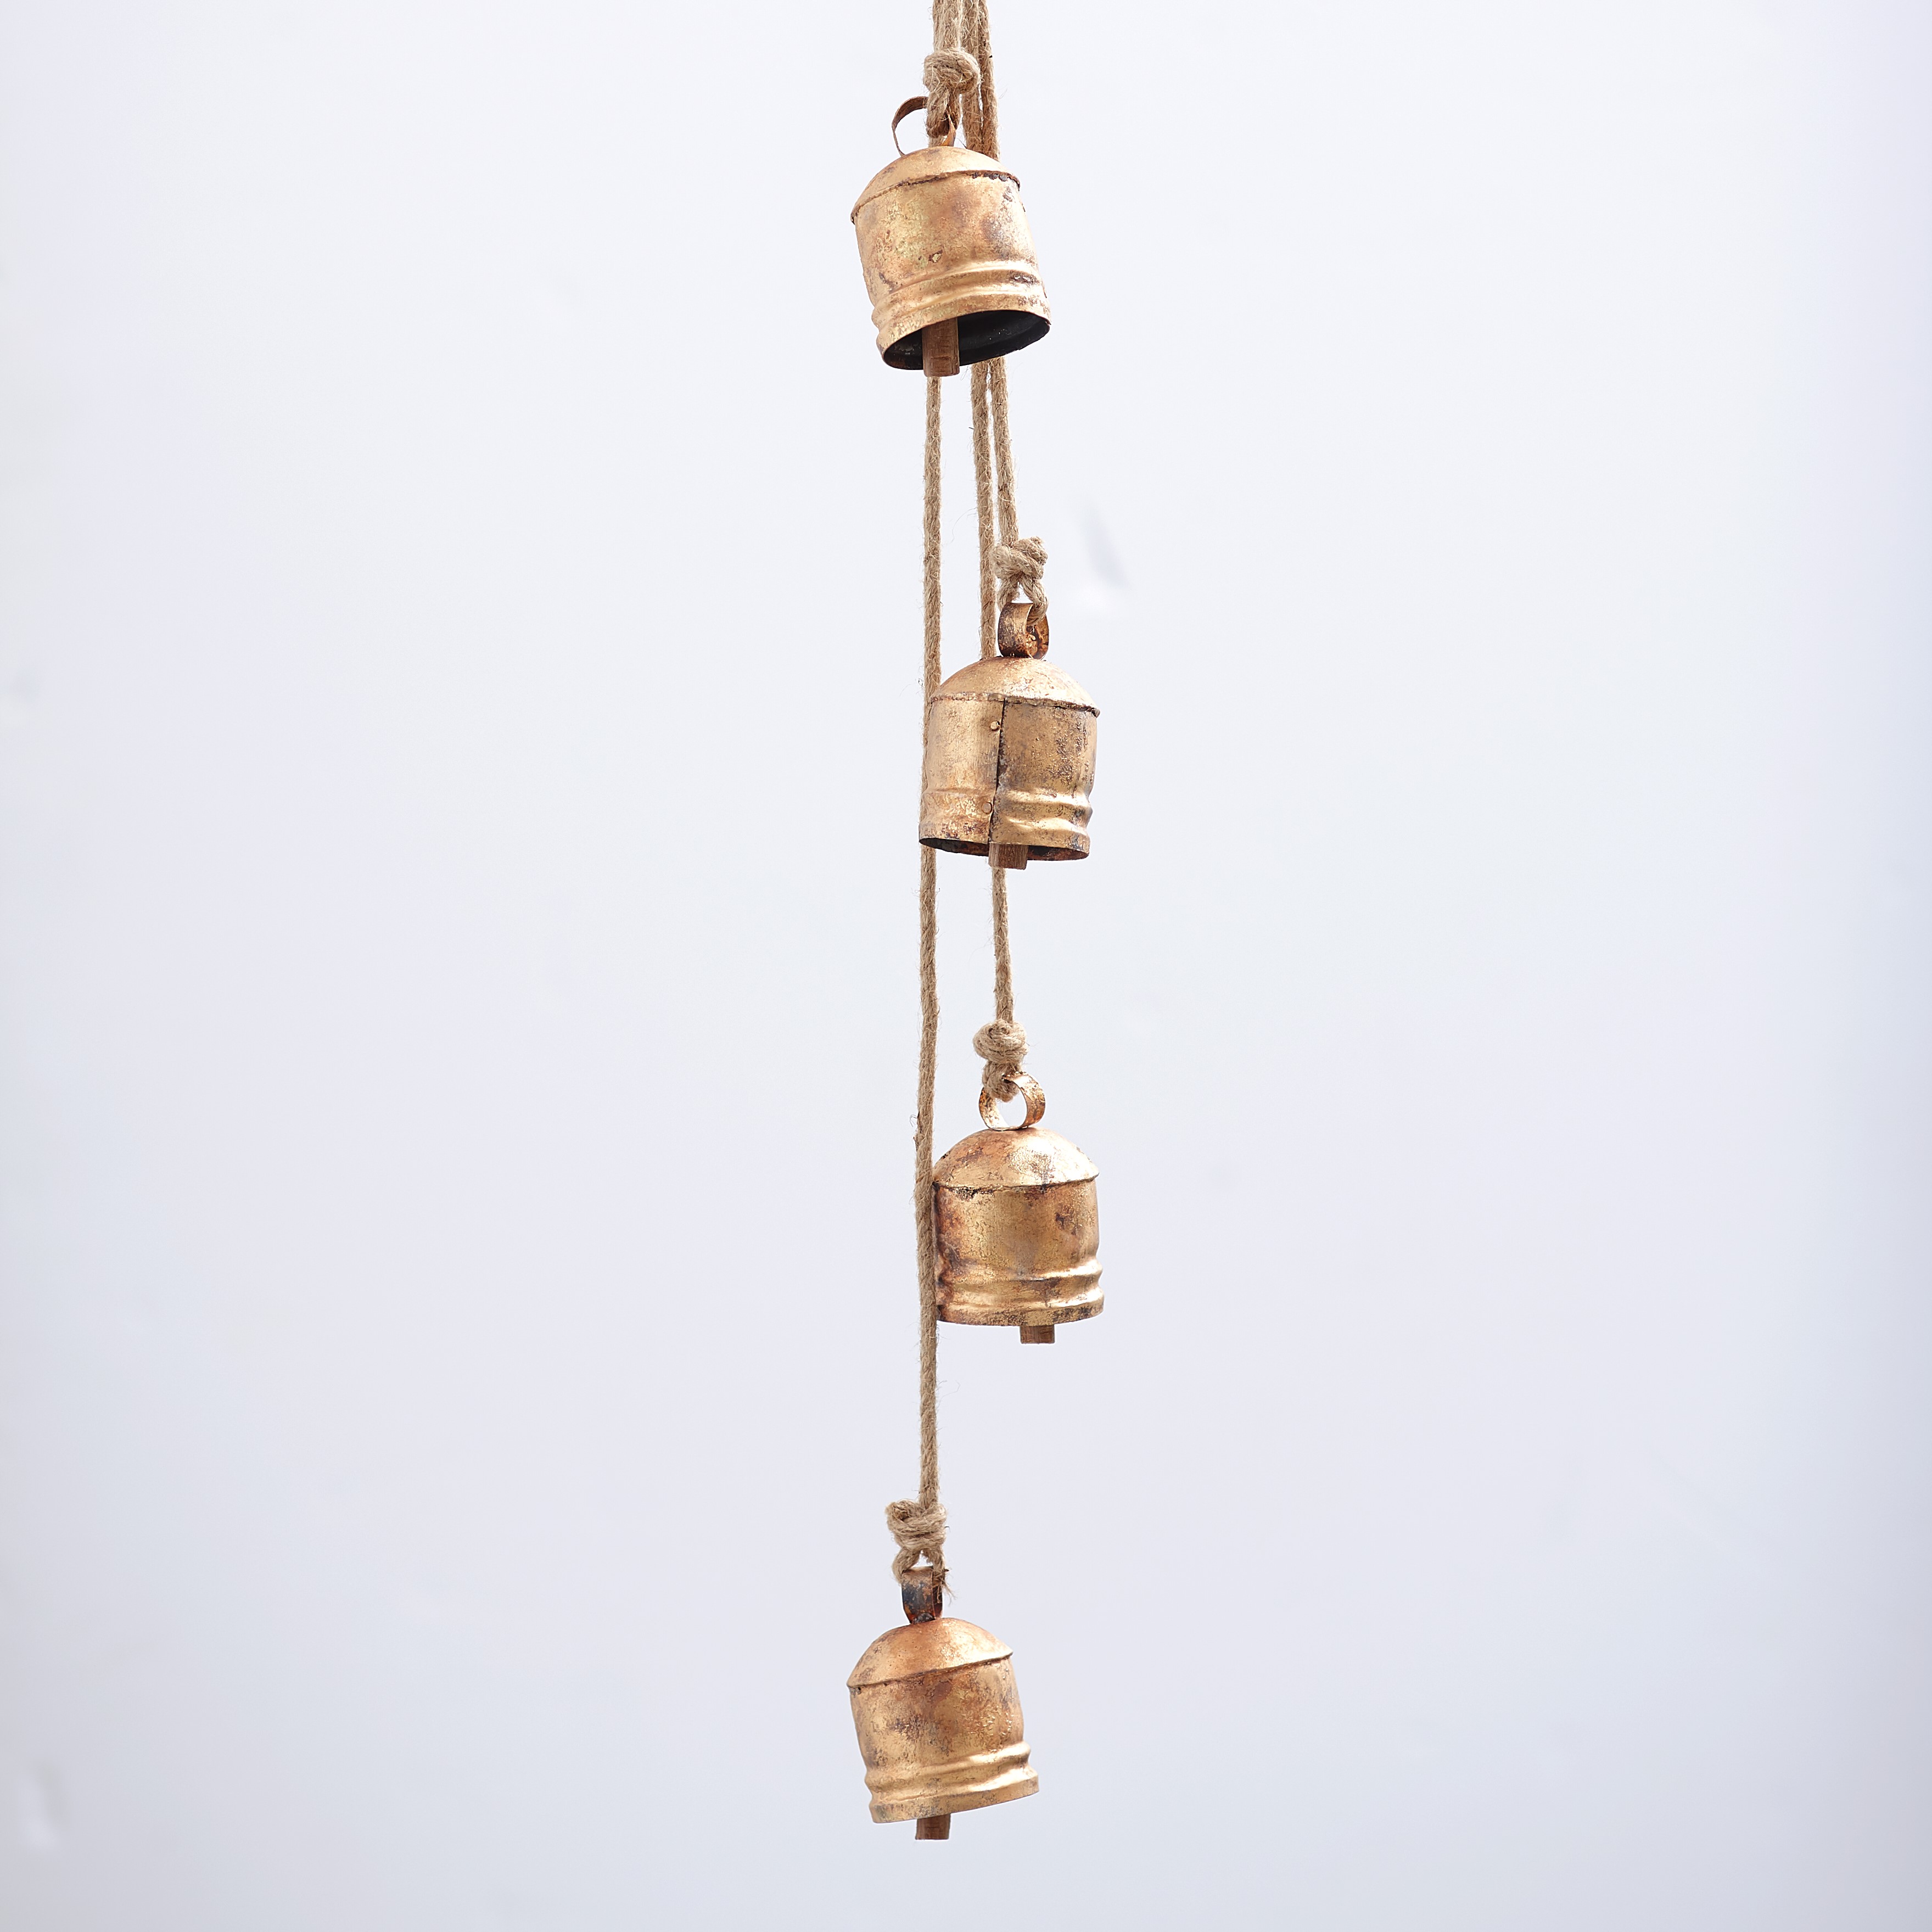 Handcrafted Hanging Bell Cluster Wind Chimes for Outdoors - Bronze - image 2 of 4